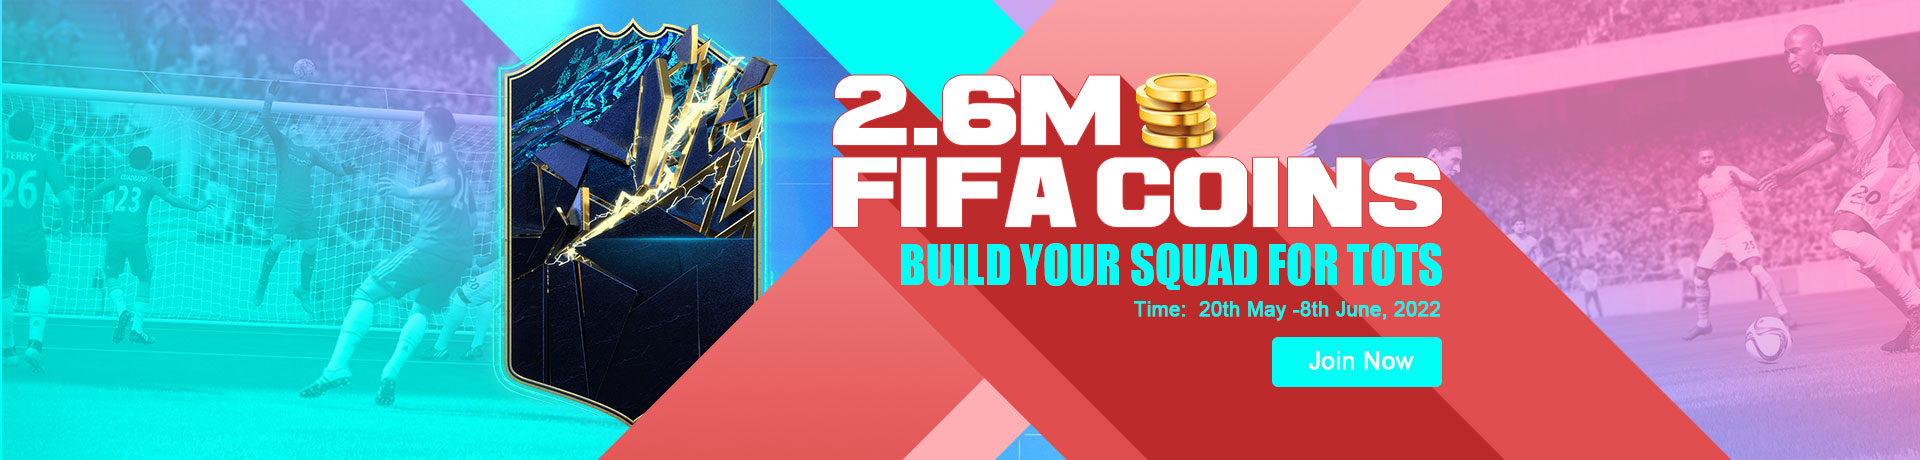 2.6M FIFA COINS, BUILD YOUR SQUAD FOR TOTS